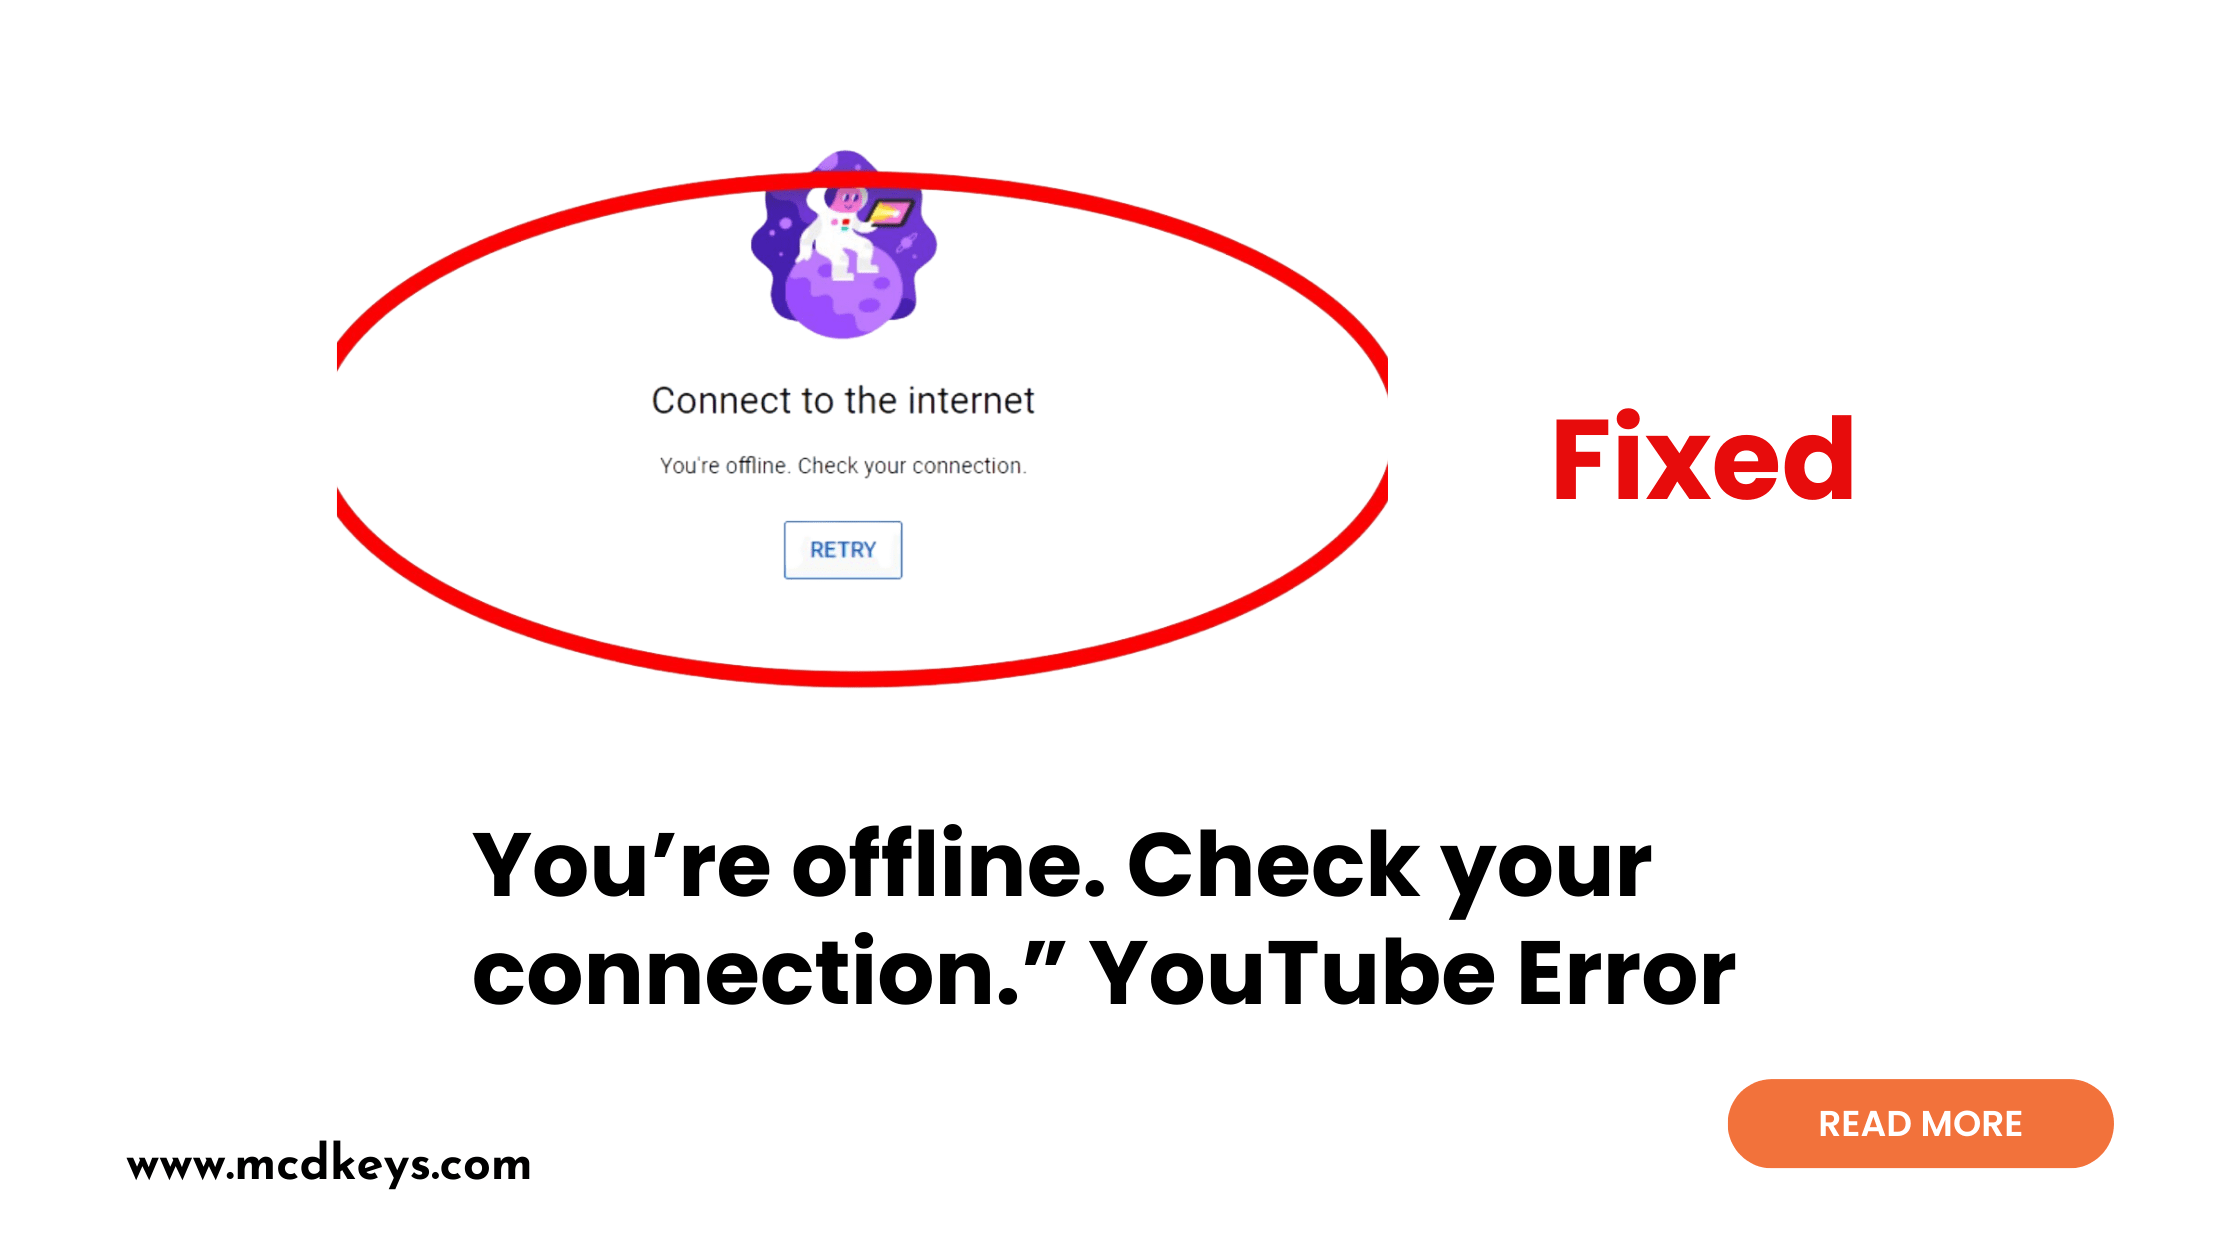 You’re offline. Check your connection. YouTube Error